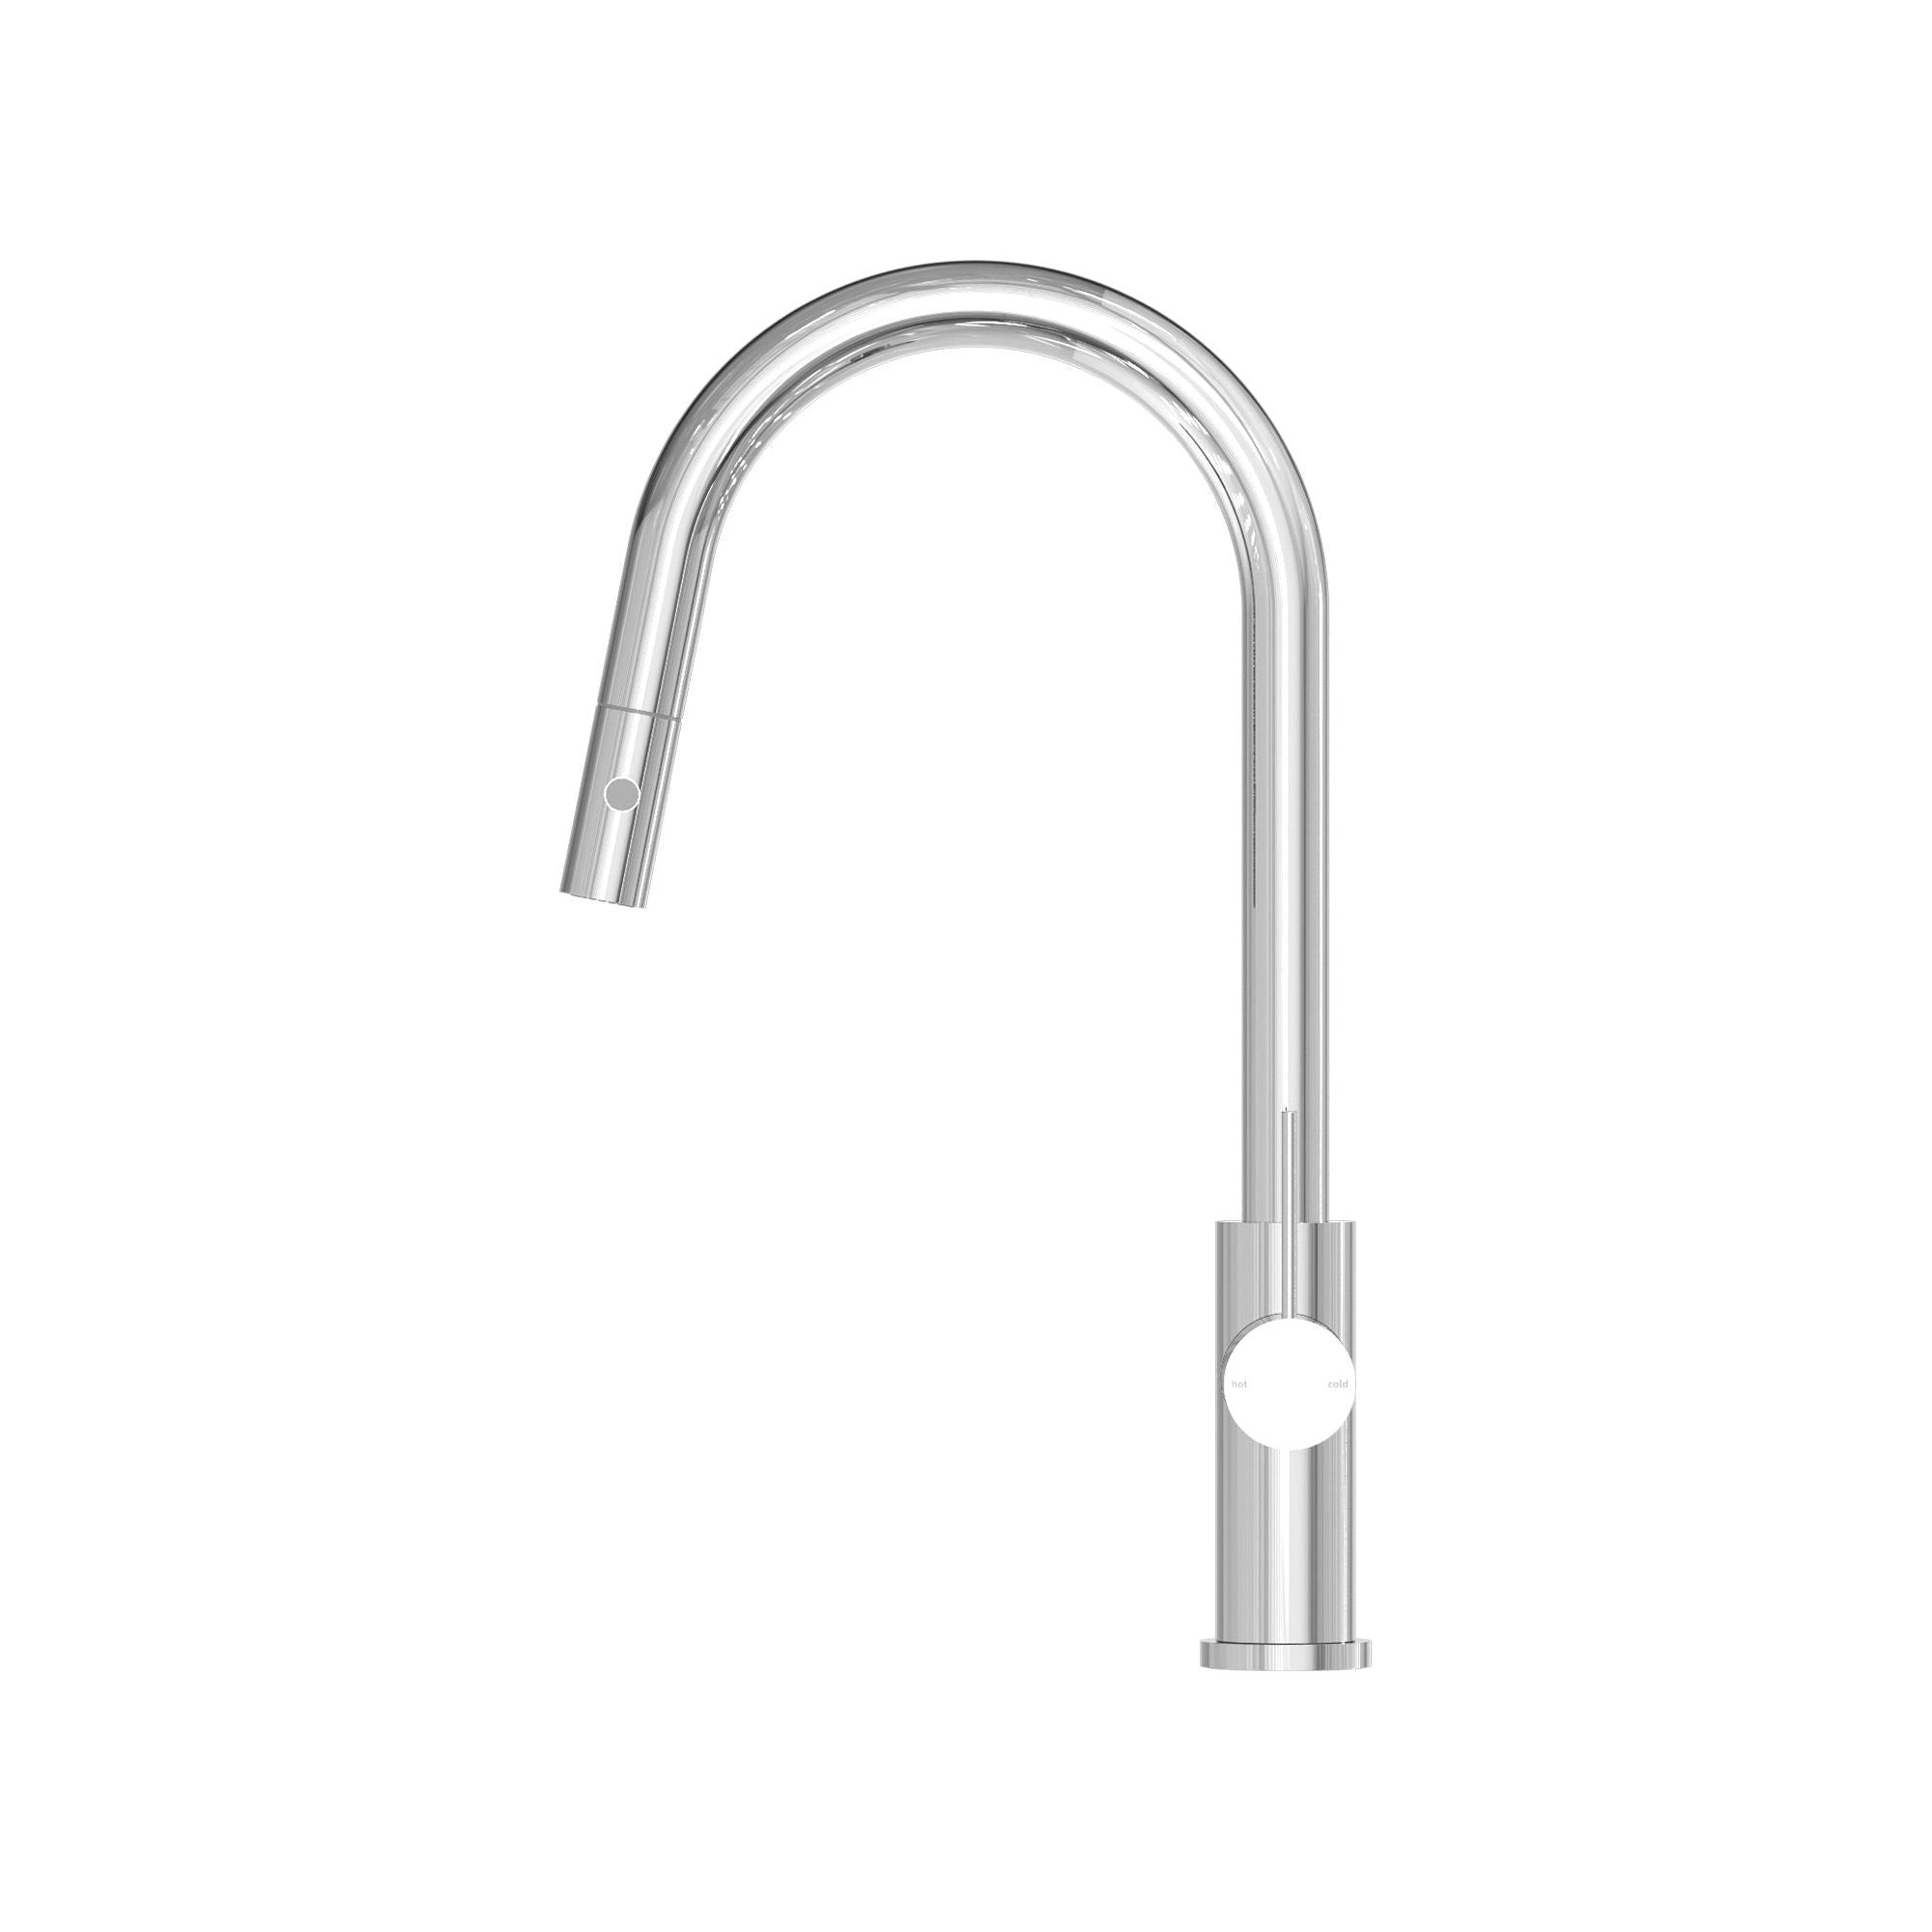 Mecca pull out kitchen mixer with vegie spray function